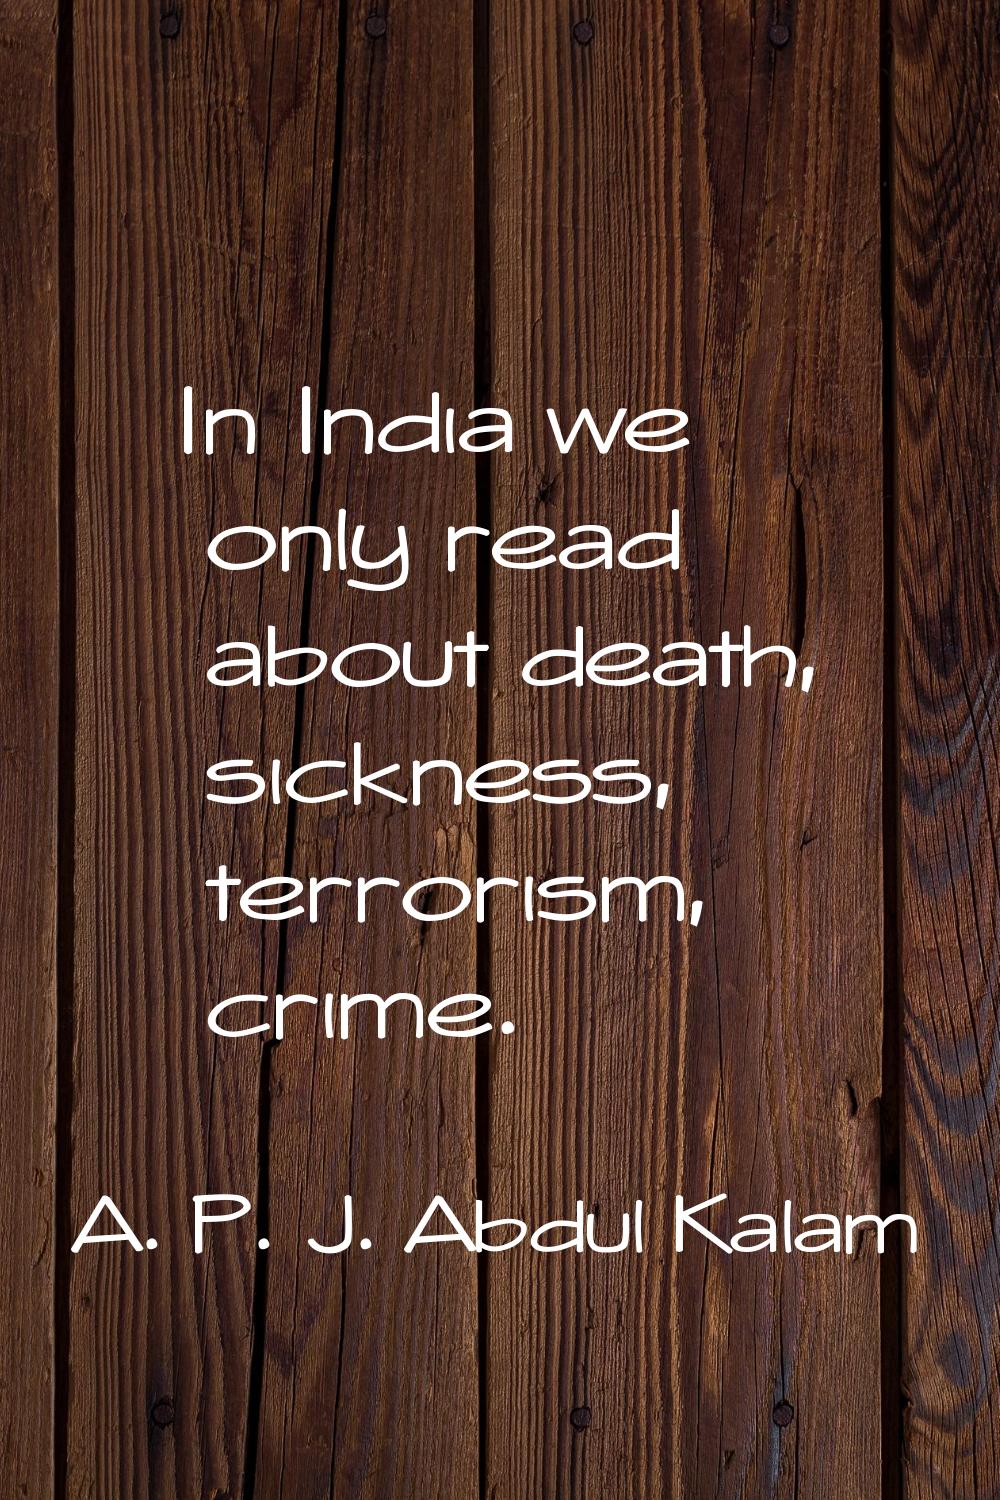 In India we only read about death, sickness, terrorism, crime.